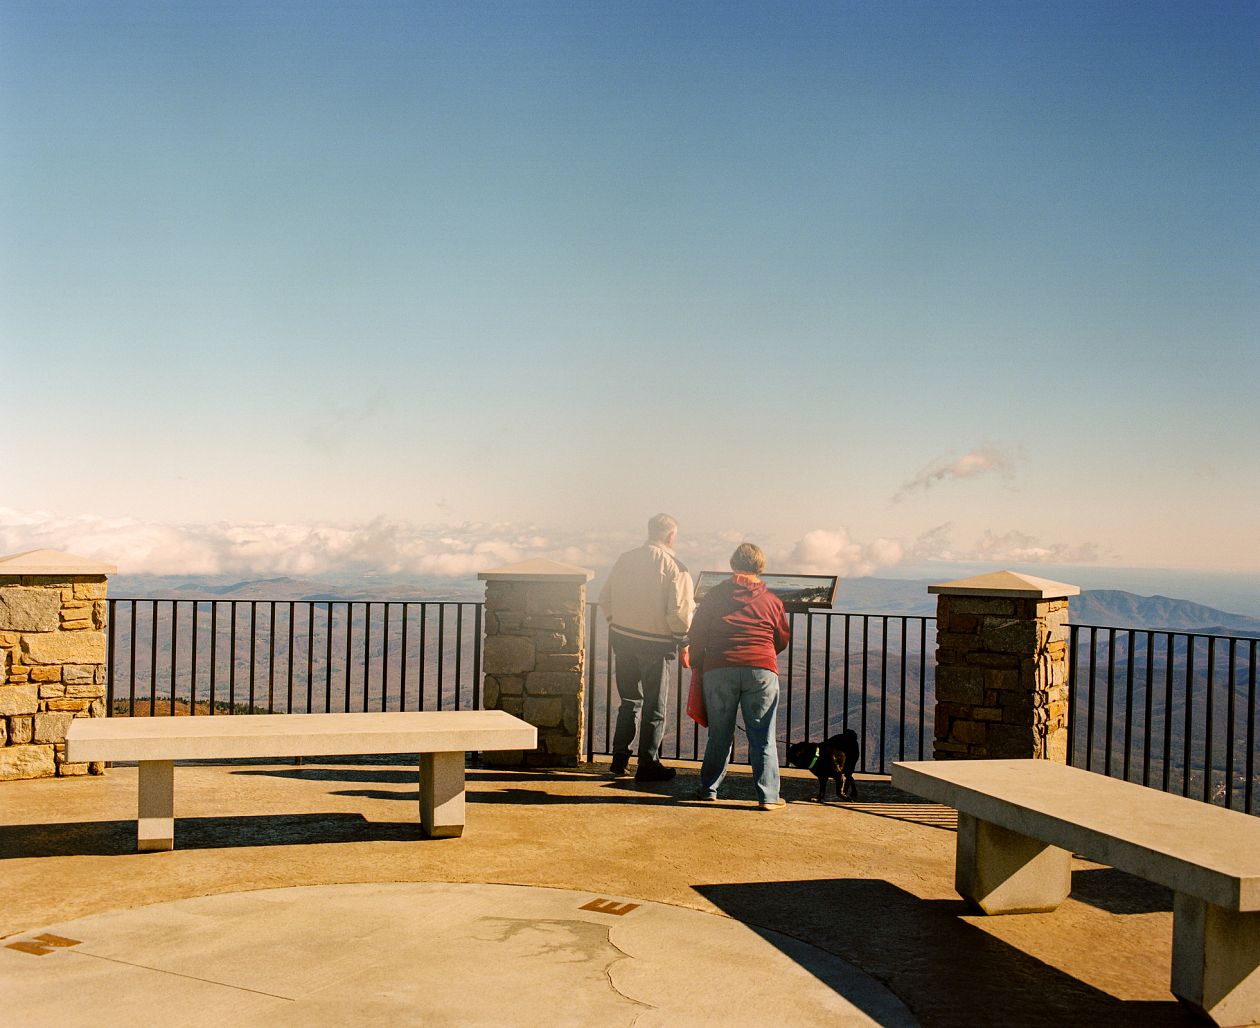 Tourist couple looking at the view from the observation deck on the mountain